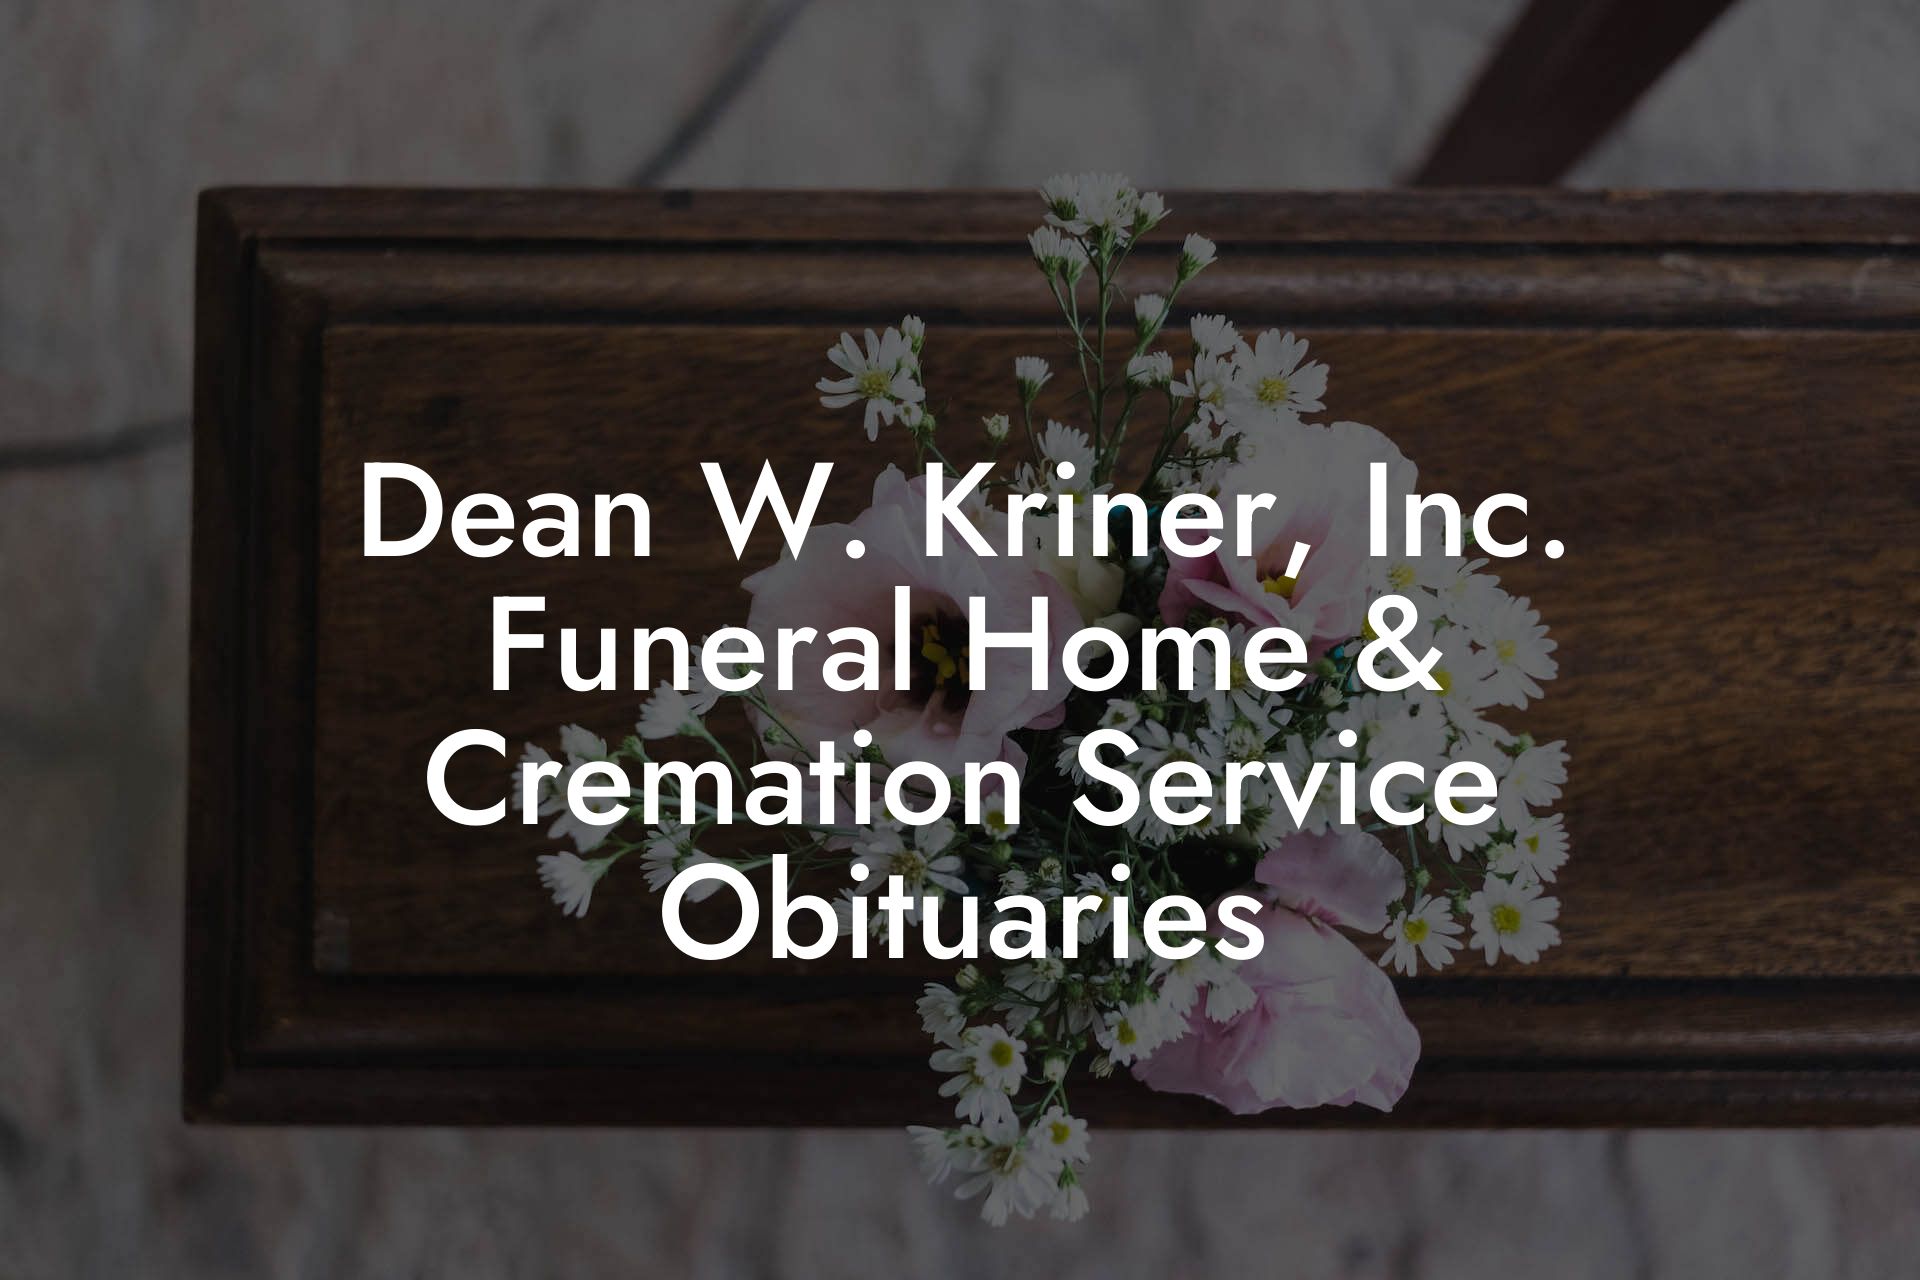 Dean W. Kriner, Inc. Funeral Home & Cremation Service Obituaries